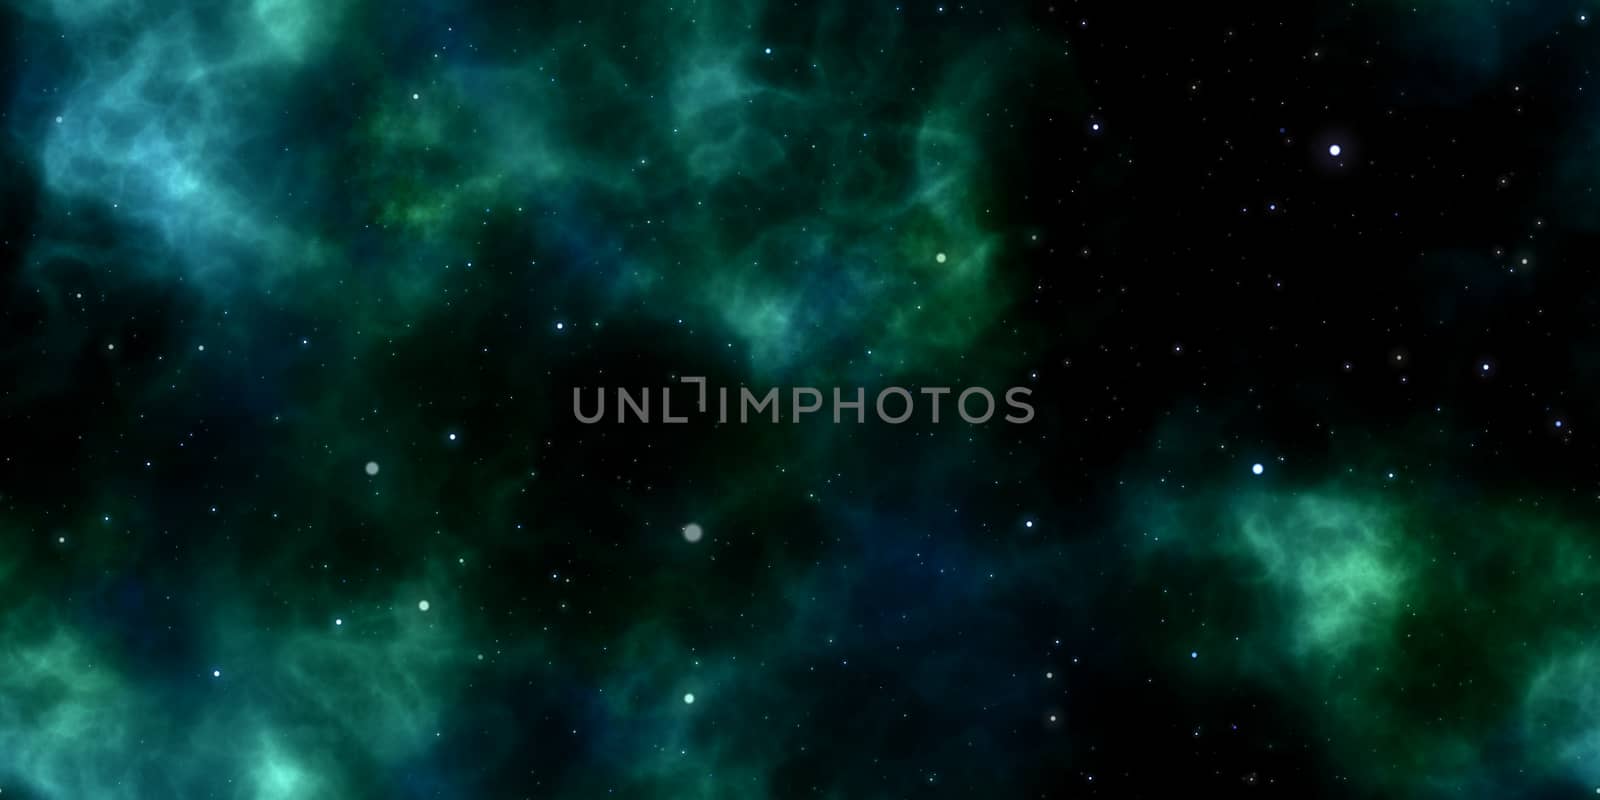 Deep Sea Blue Starry Milky Way Clouds on Night Sky Galaxy Background. Abstract Cosmos Infinity Texture. 3D Rendering. 3D Illustration.